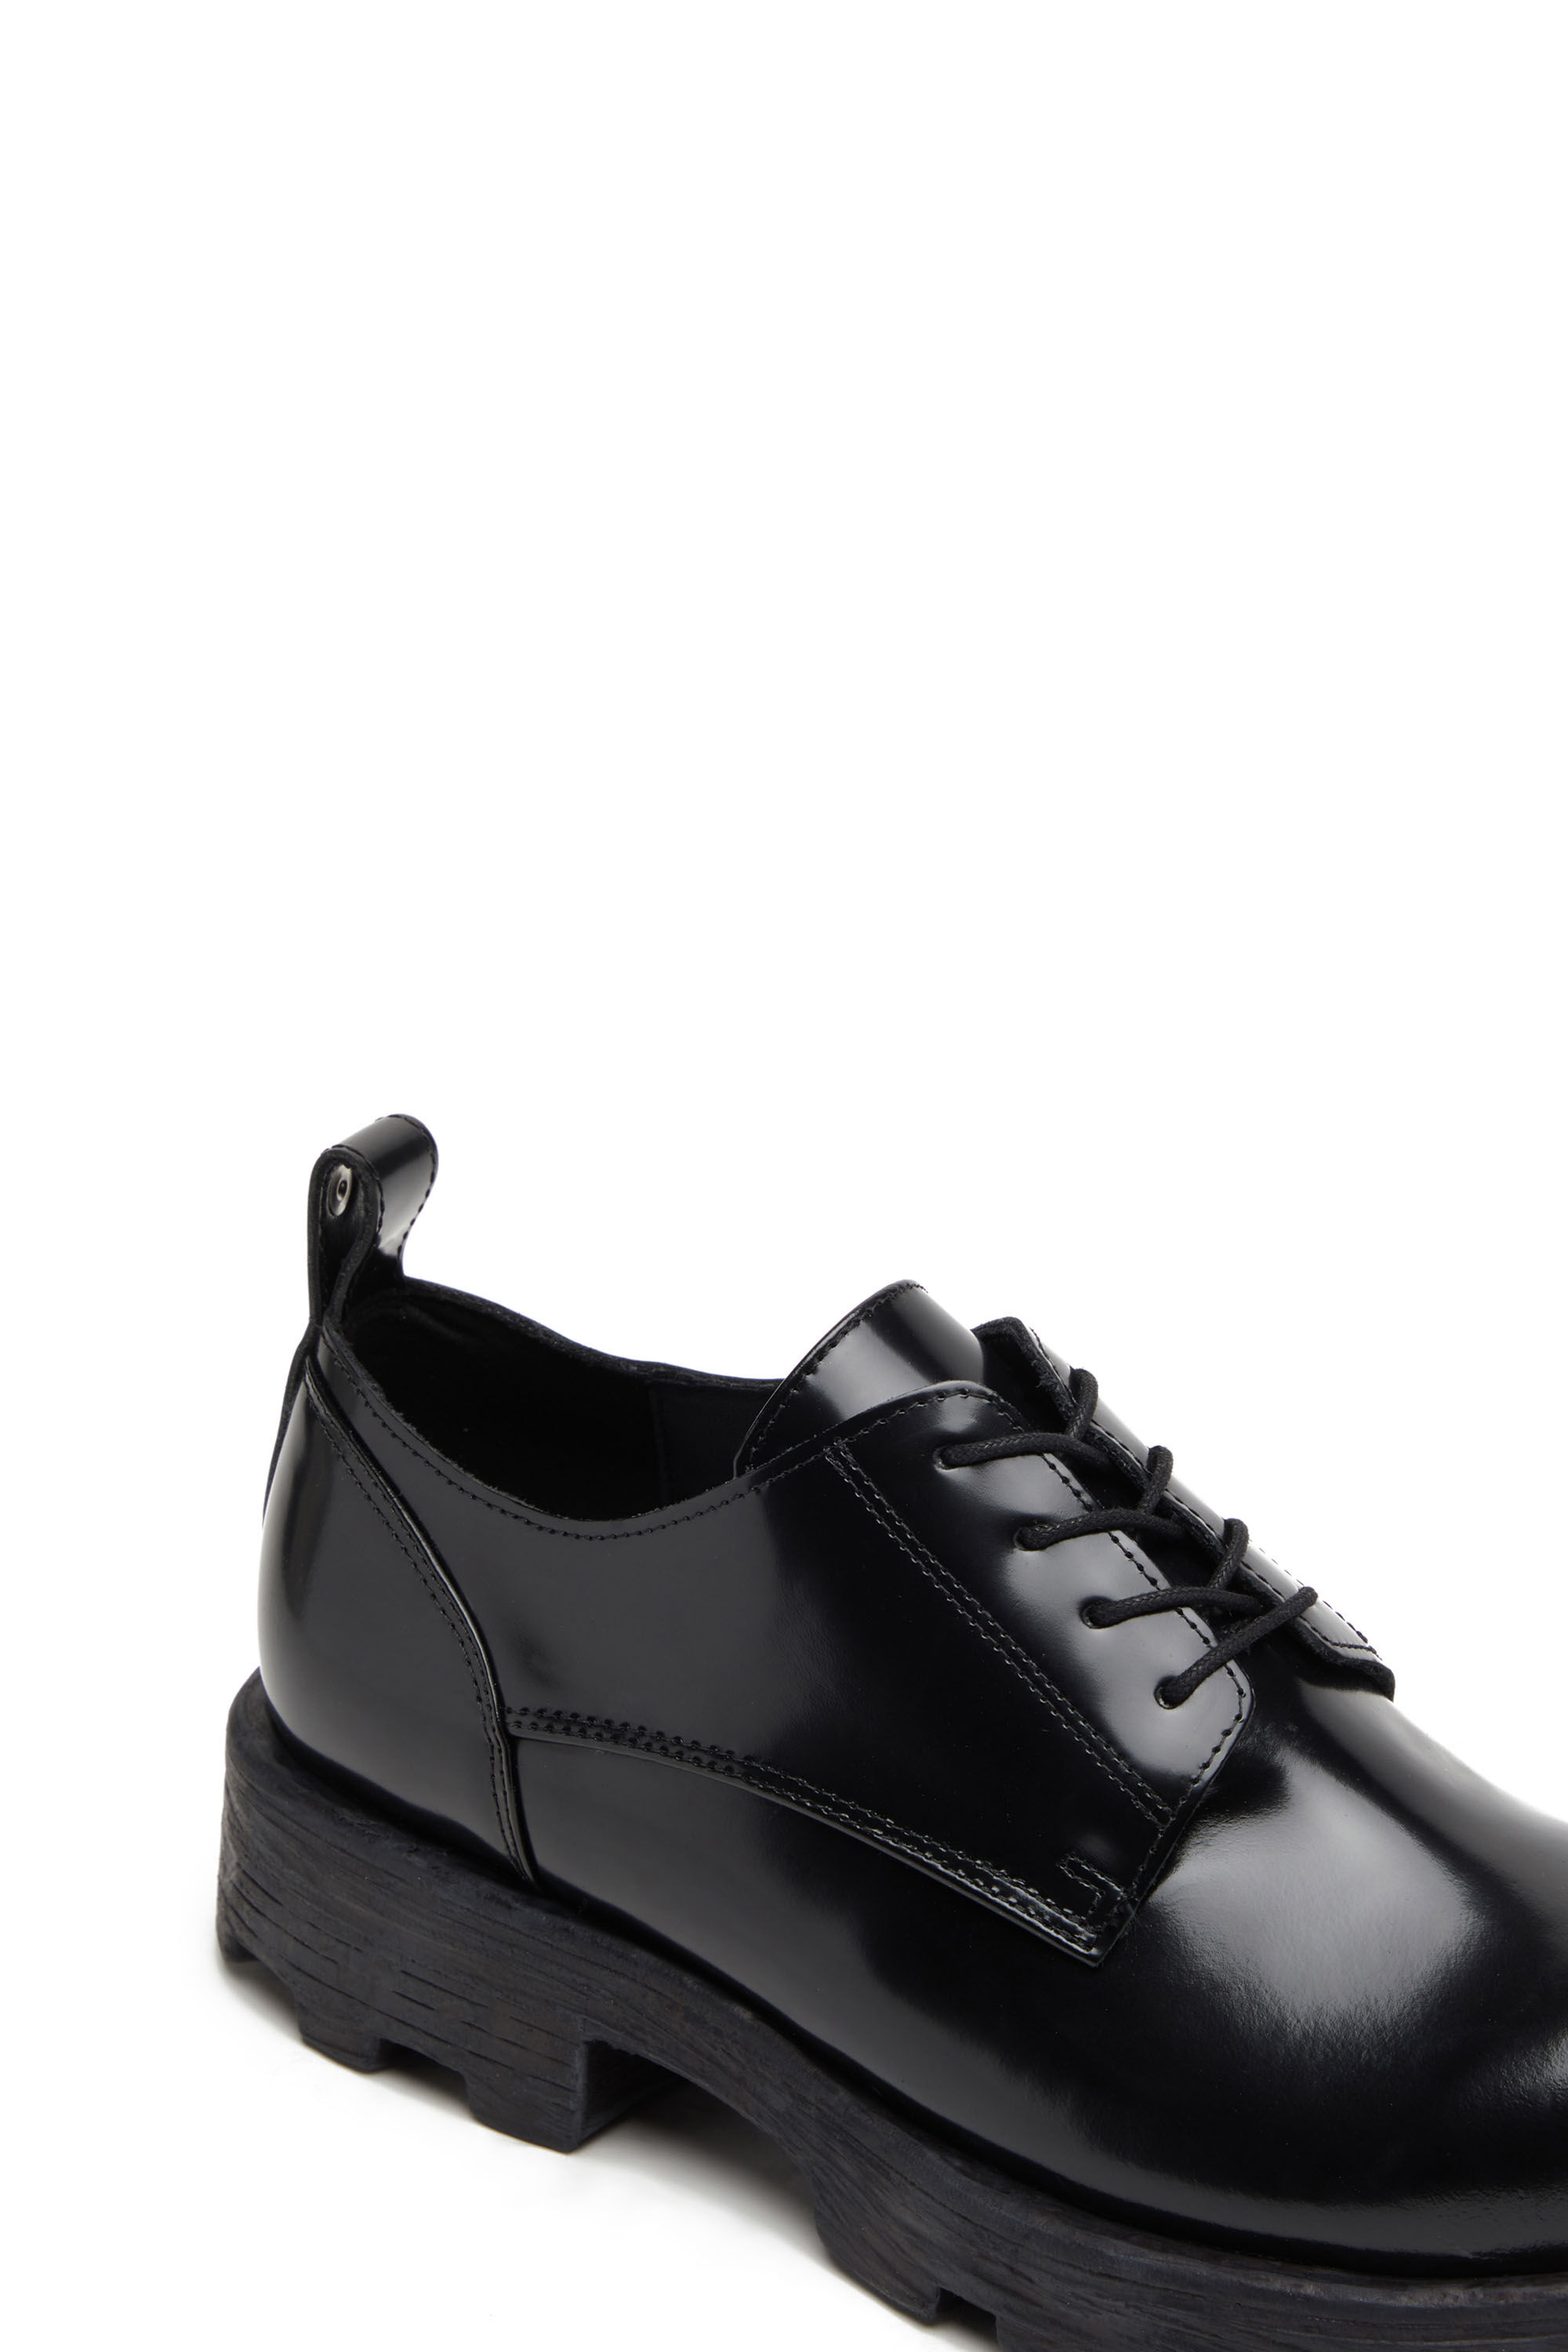 D-HAMMER SH Man: Lace-up shoes in shiny leather | Diesel